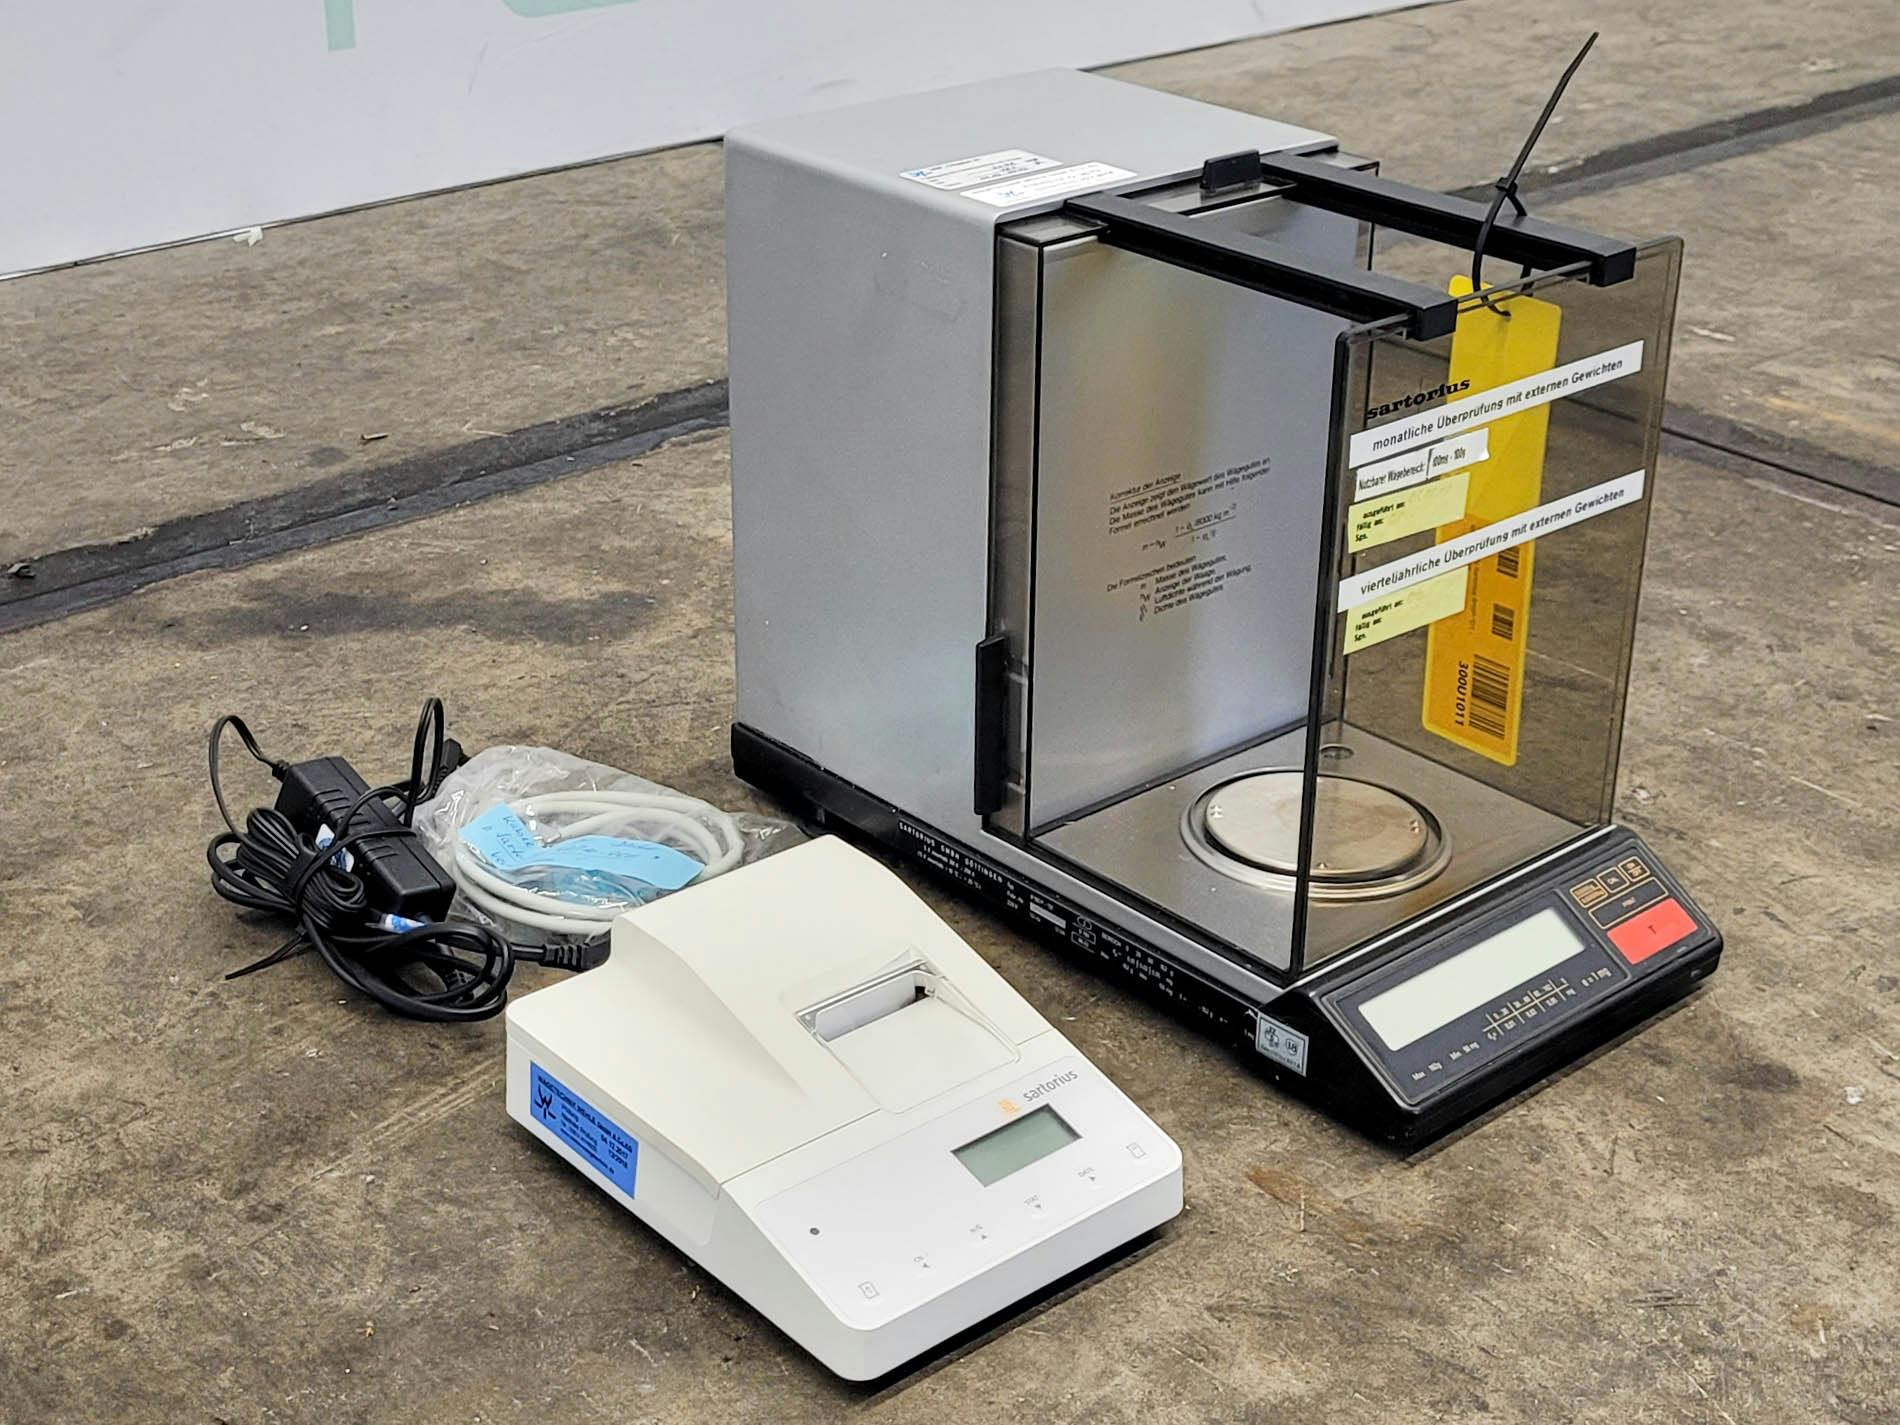 Sartorius R160P-*D1 "weighing scale" - Diverso - image 4